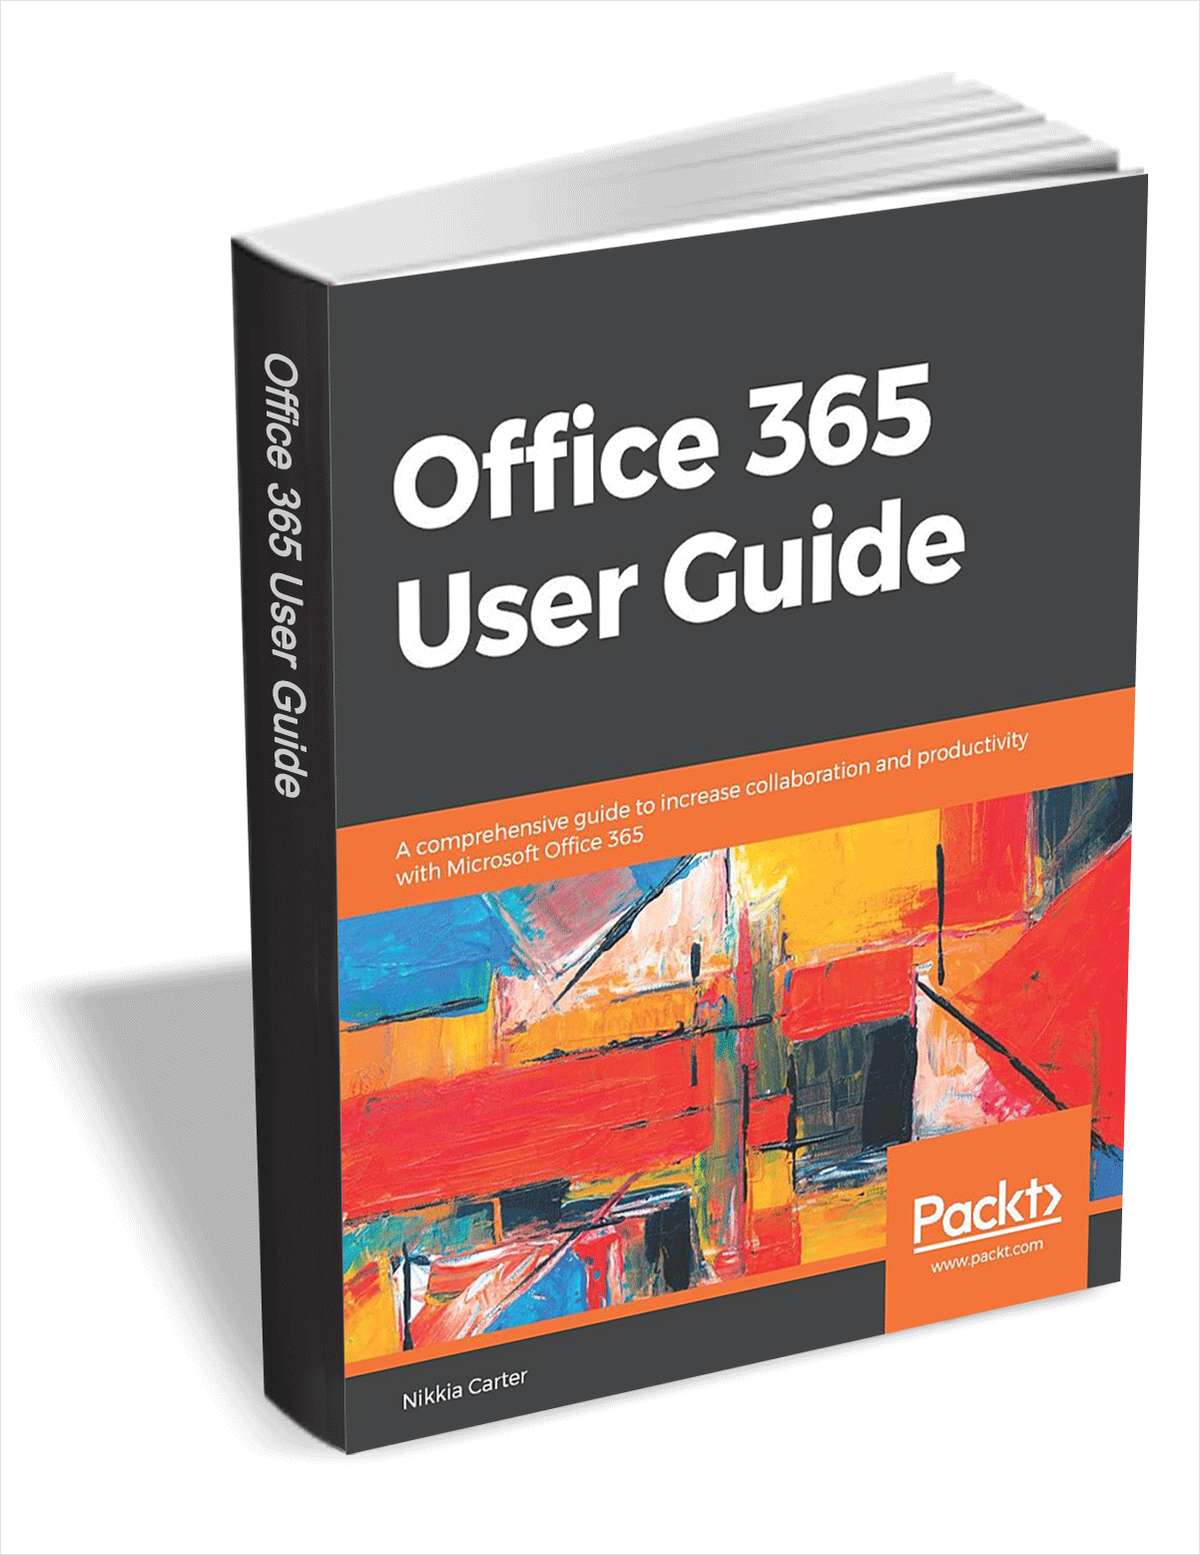 [expired]-ebook:-“office-365-user-guide-($23.99-value)-free-for-a-limited-time”